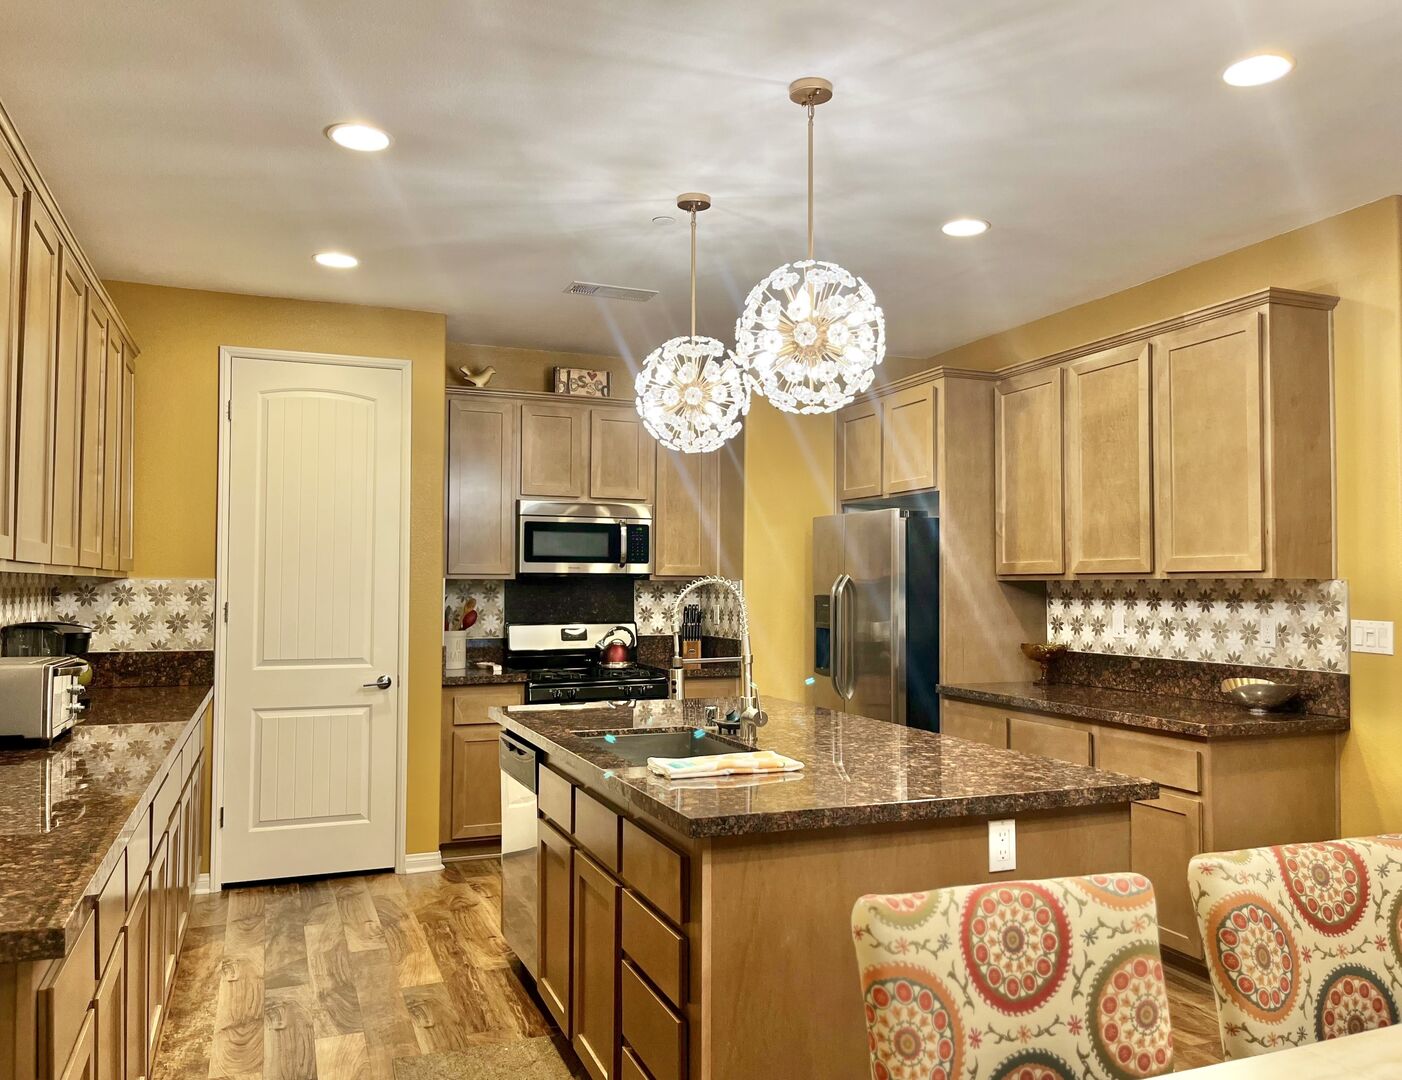 If you would like to arrive a fully equipped kitchen, ask about our concierge services.